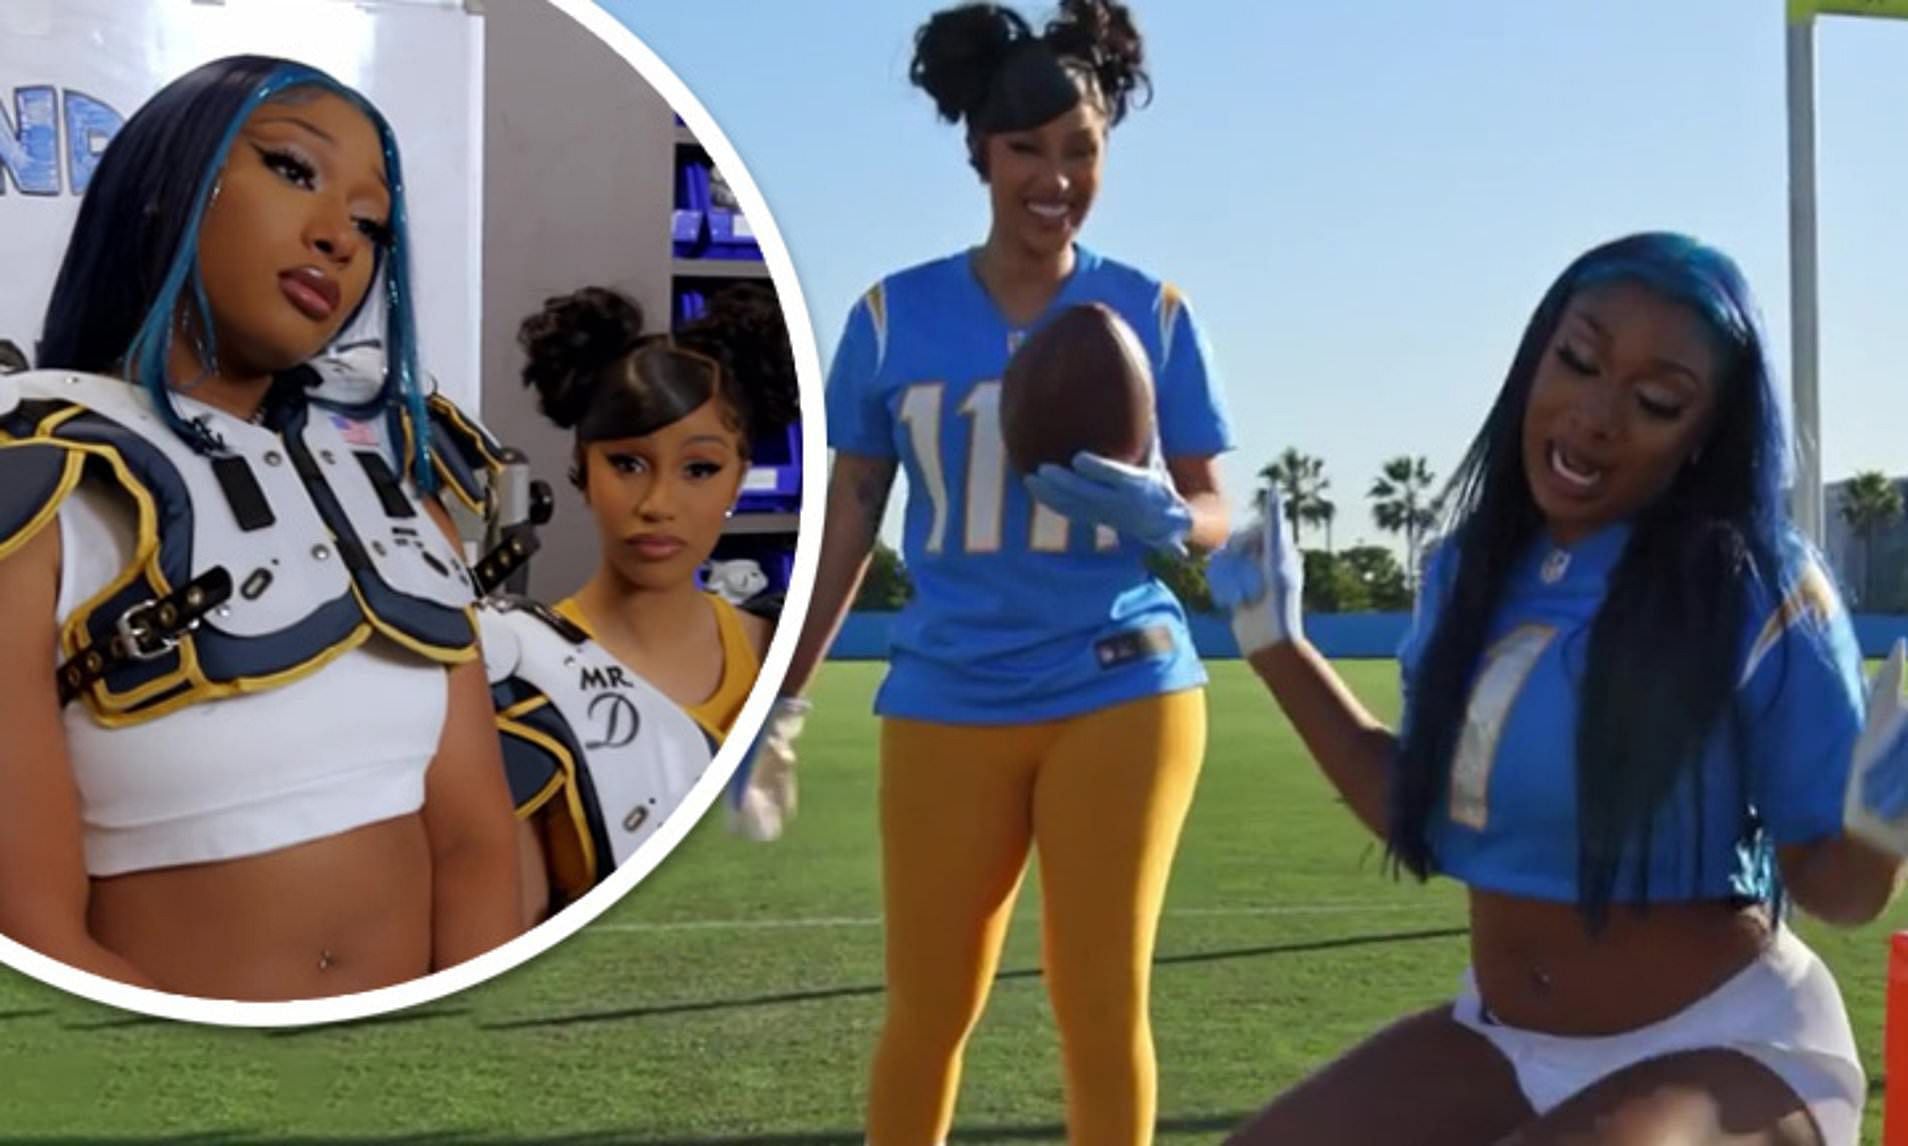 Rappers Cardi B and Megan Thee Stallion at the Chargers practice facility. Source: Daily Mail